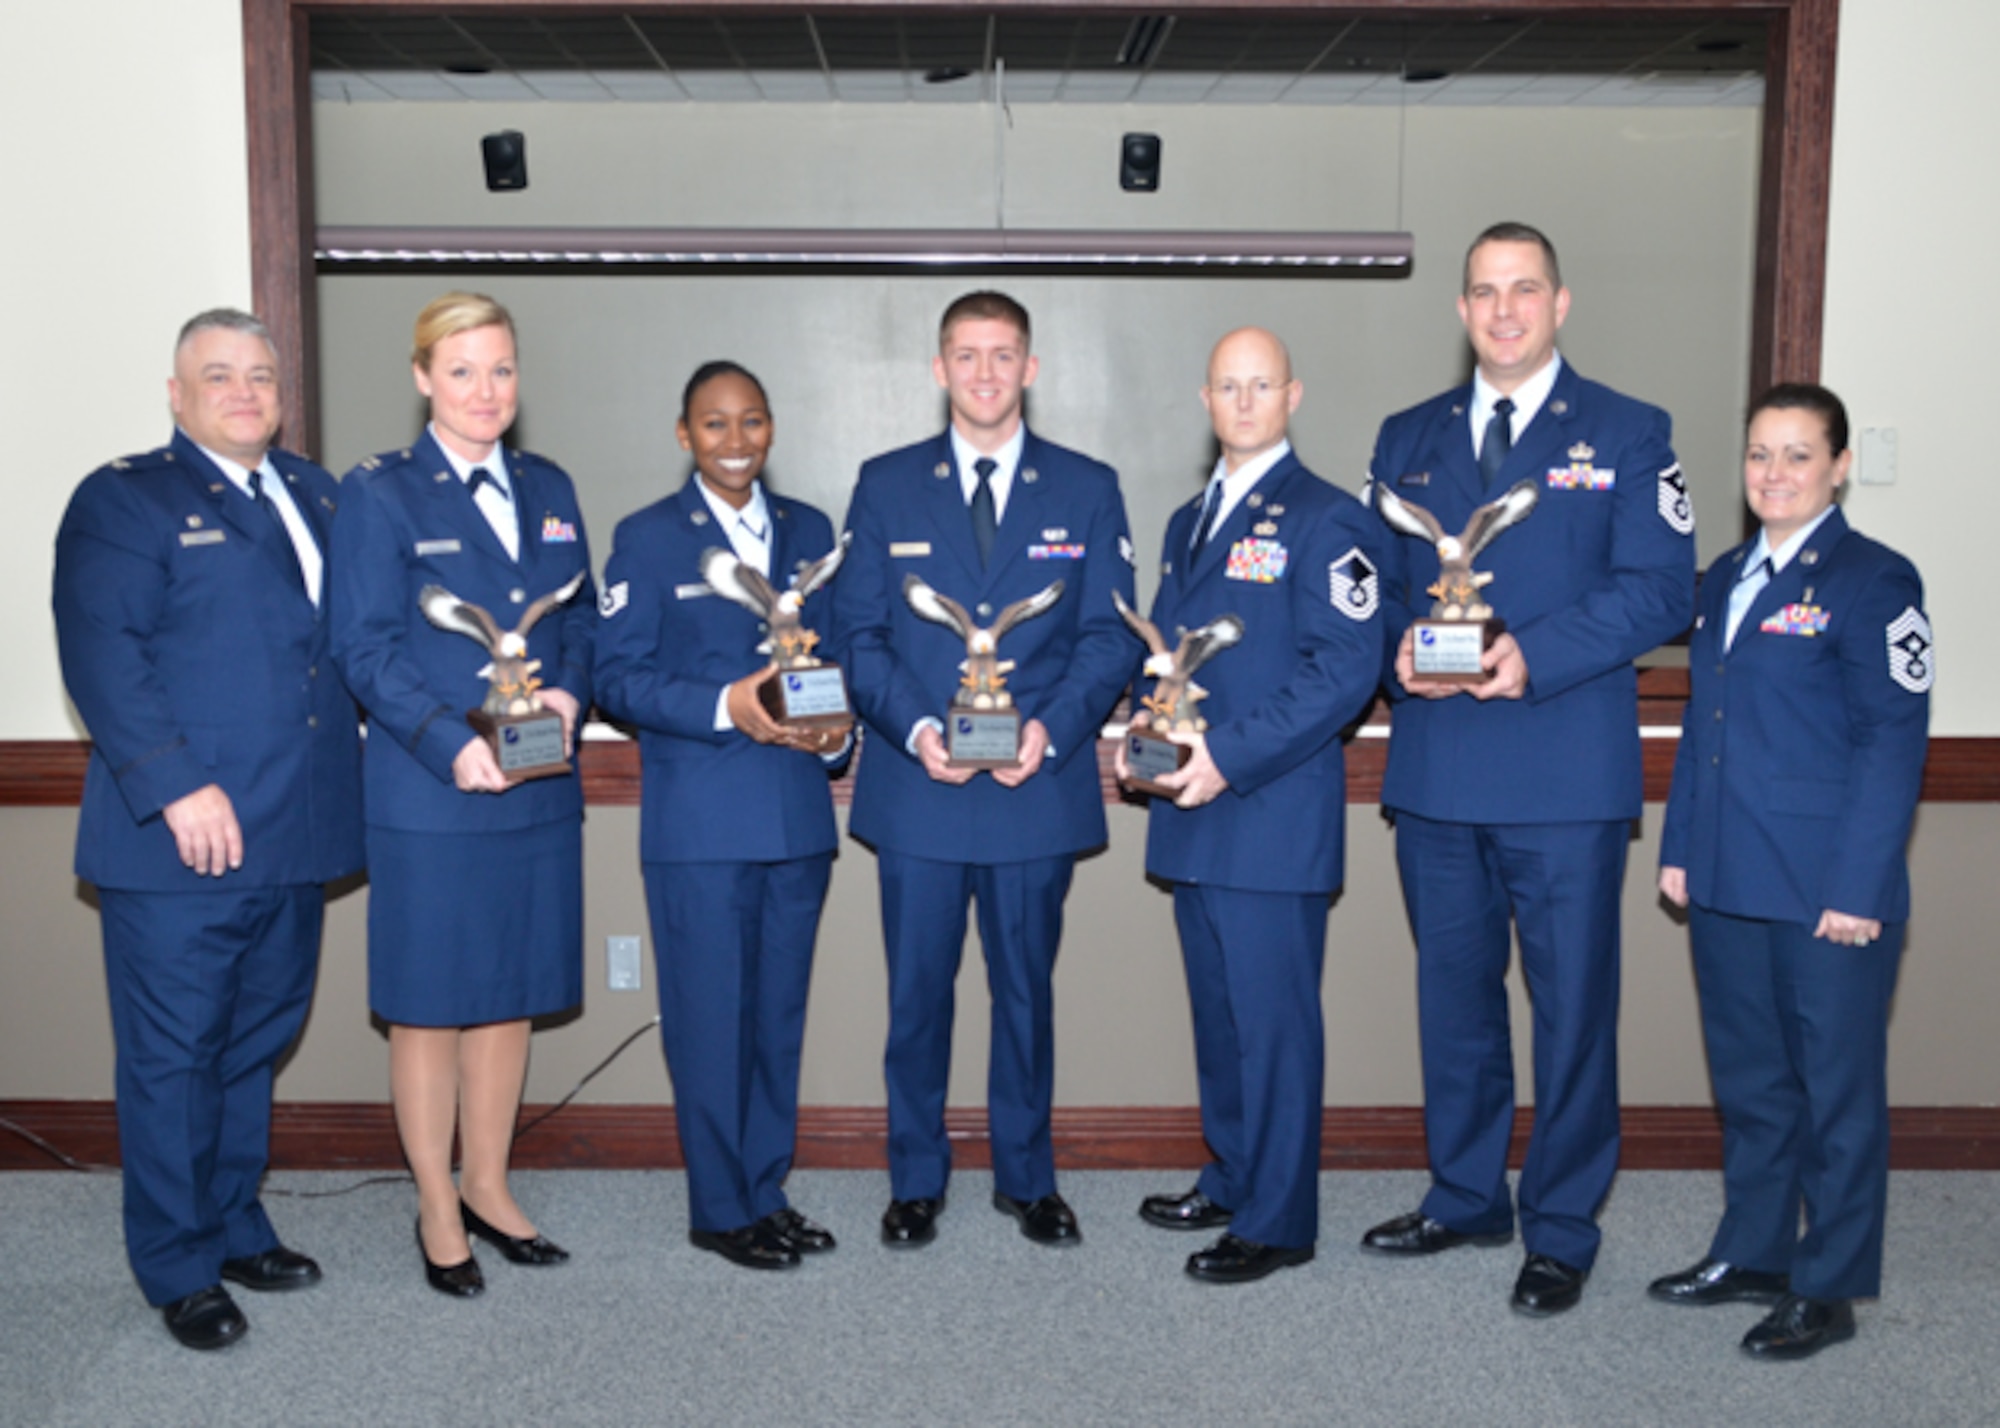 Col. Ken Eaves, 131st Bomb Wing Commander (left) and 131st Command Chief Master Sgt. Jessica Settle (right) recognize winners of the wing’s 2016 Outstanding Airman of the Year awards during the Missouri Air National Guard’s OAY Banquet held at Whiteman Air Force Base, Missouri, Jan. 6. From left to right, winners are: Capt. Amy Cottrell, 131st Medical Group, Company Grade Officer of the Year; Staff Sgt. Heather Campbell, 157th Air Communications Squadron, Noncommissioned Officer of the Year; Senior Airman Travis Hugh, 157th ACOMS, Airman of the Year; Master Sgt. Thomas DuMont Jr., 157th Combat Operations Squadron, Senior NCO of the Year; and Master Sgt. Matthew Kuensting, 239th Combat Operations Squadron, First Sergeant of the Year. Not pictured is Field Grade Officer of the Year Maj. David Thomas, 157th COS. In subsequent competition, Campbell received the all-new Missouri Air National Guard Command Chief’s Award, and DuMont took honors as top SNCO of the year across the Missouri Air National Guard, and will advance to compete at the Air National Guard Outstanding Airman of the Year level. (U.S. Air National Guard photo by Staff Sgt. Colton Elliott)